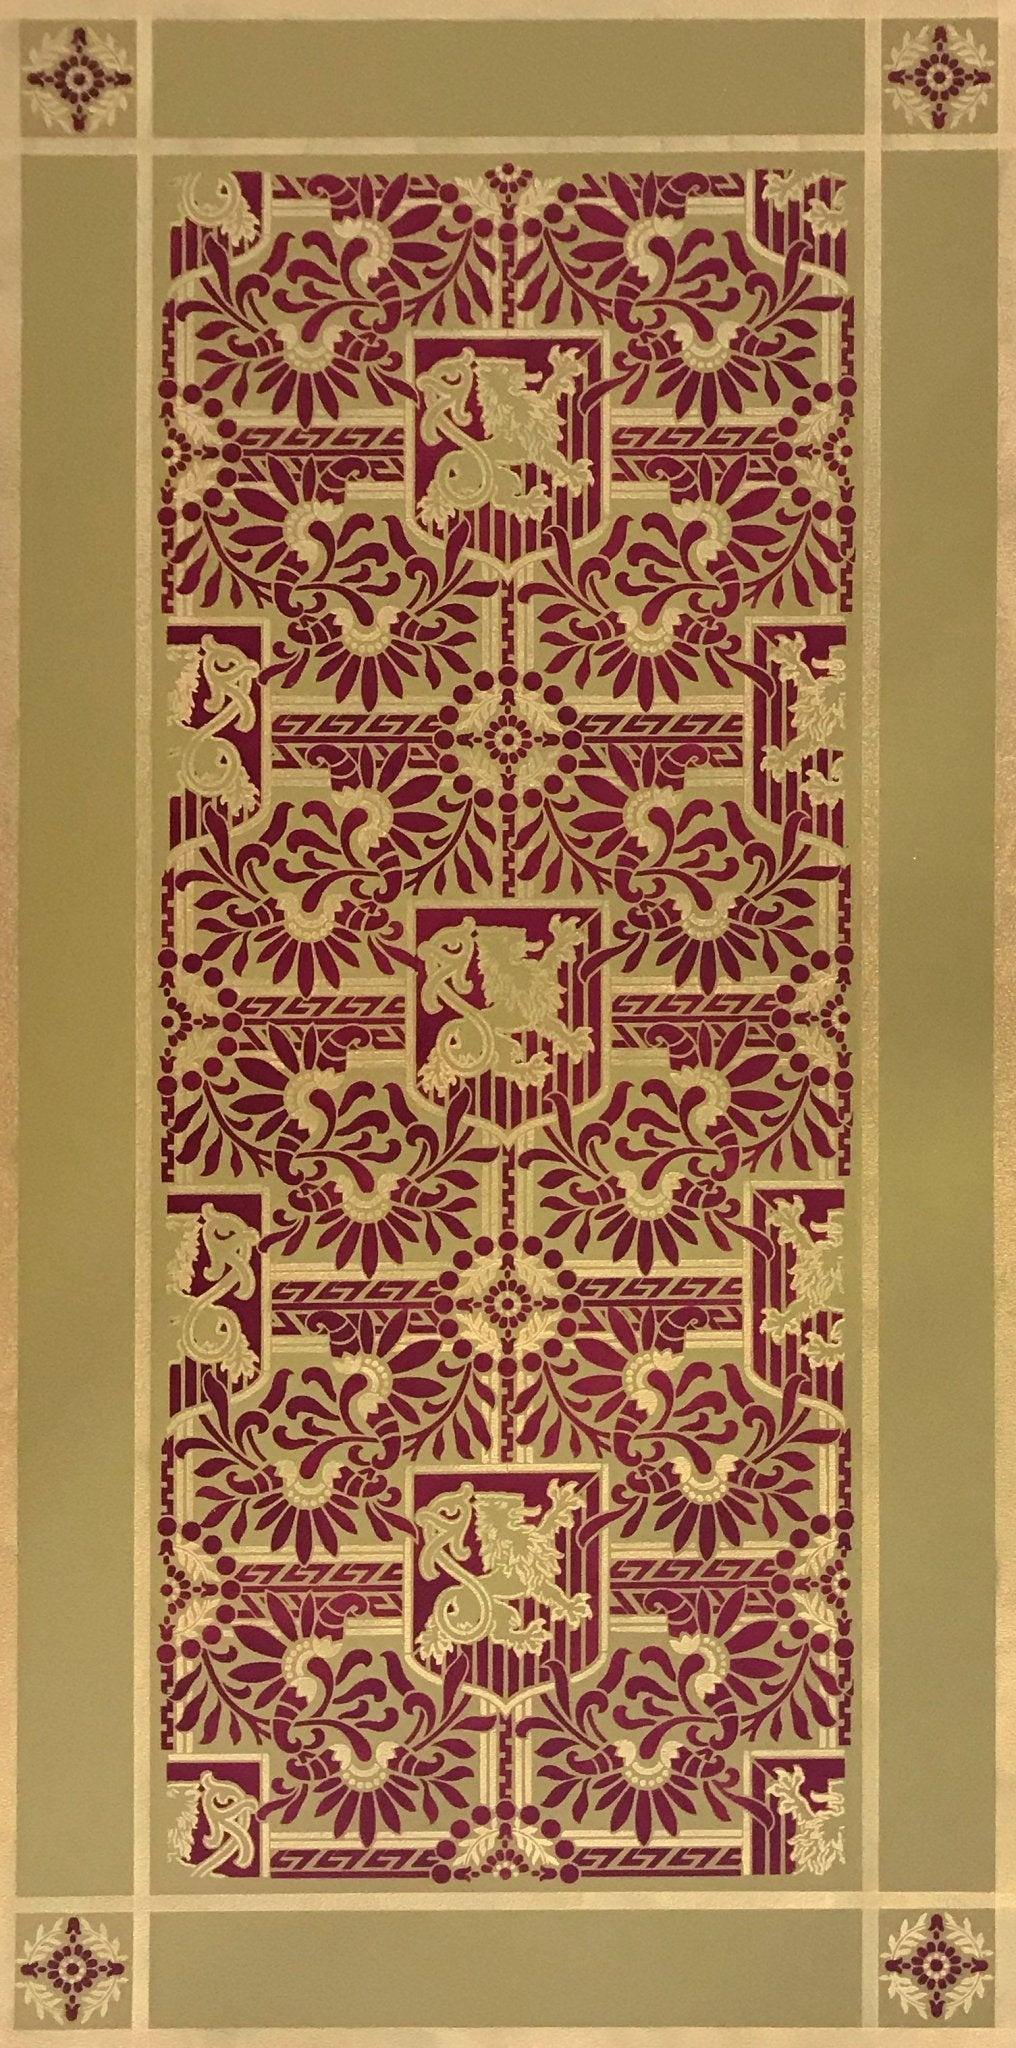 This is a full image of this floorcloth, based on a wallpaper pattern, c.1886, from the A.W.P.M.A. (American Wallpaper Manufacturer’s Association). This floorcloth deploys the original wallpaper palette.